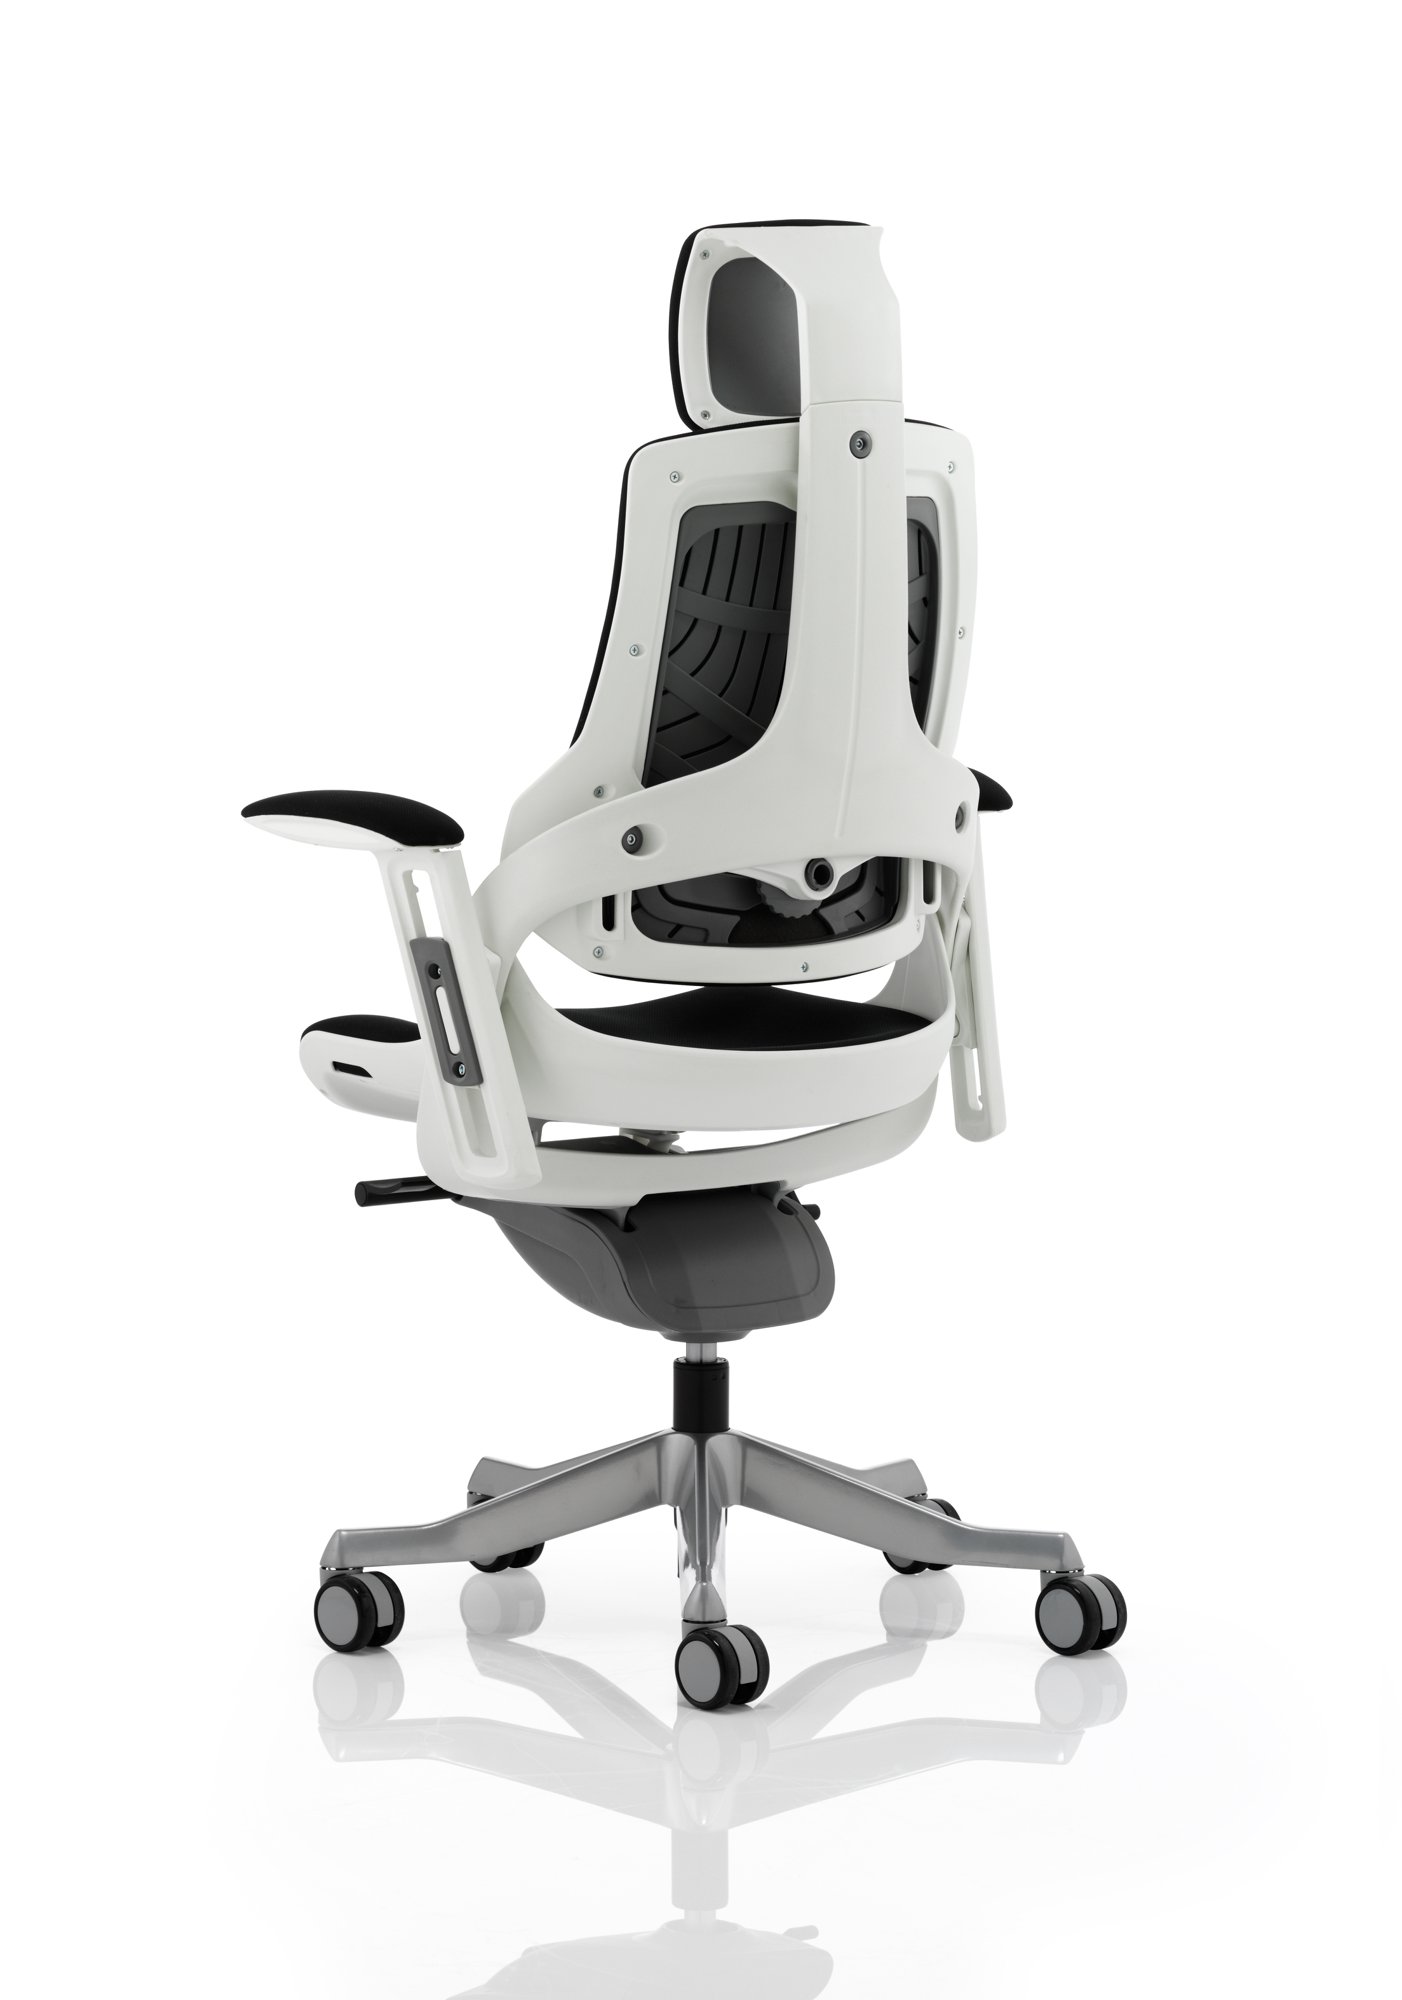 Zure Black Fabric With Arms With Headrest KC0161